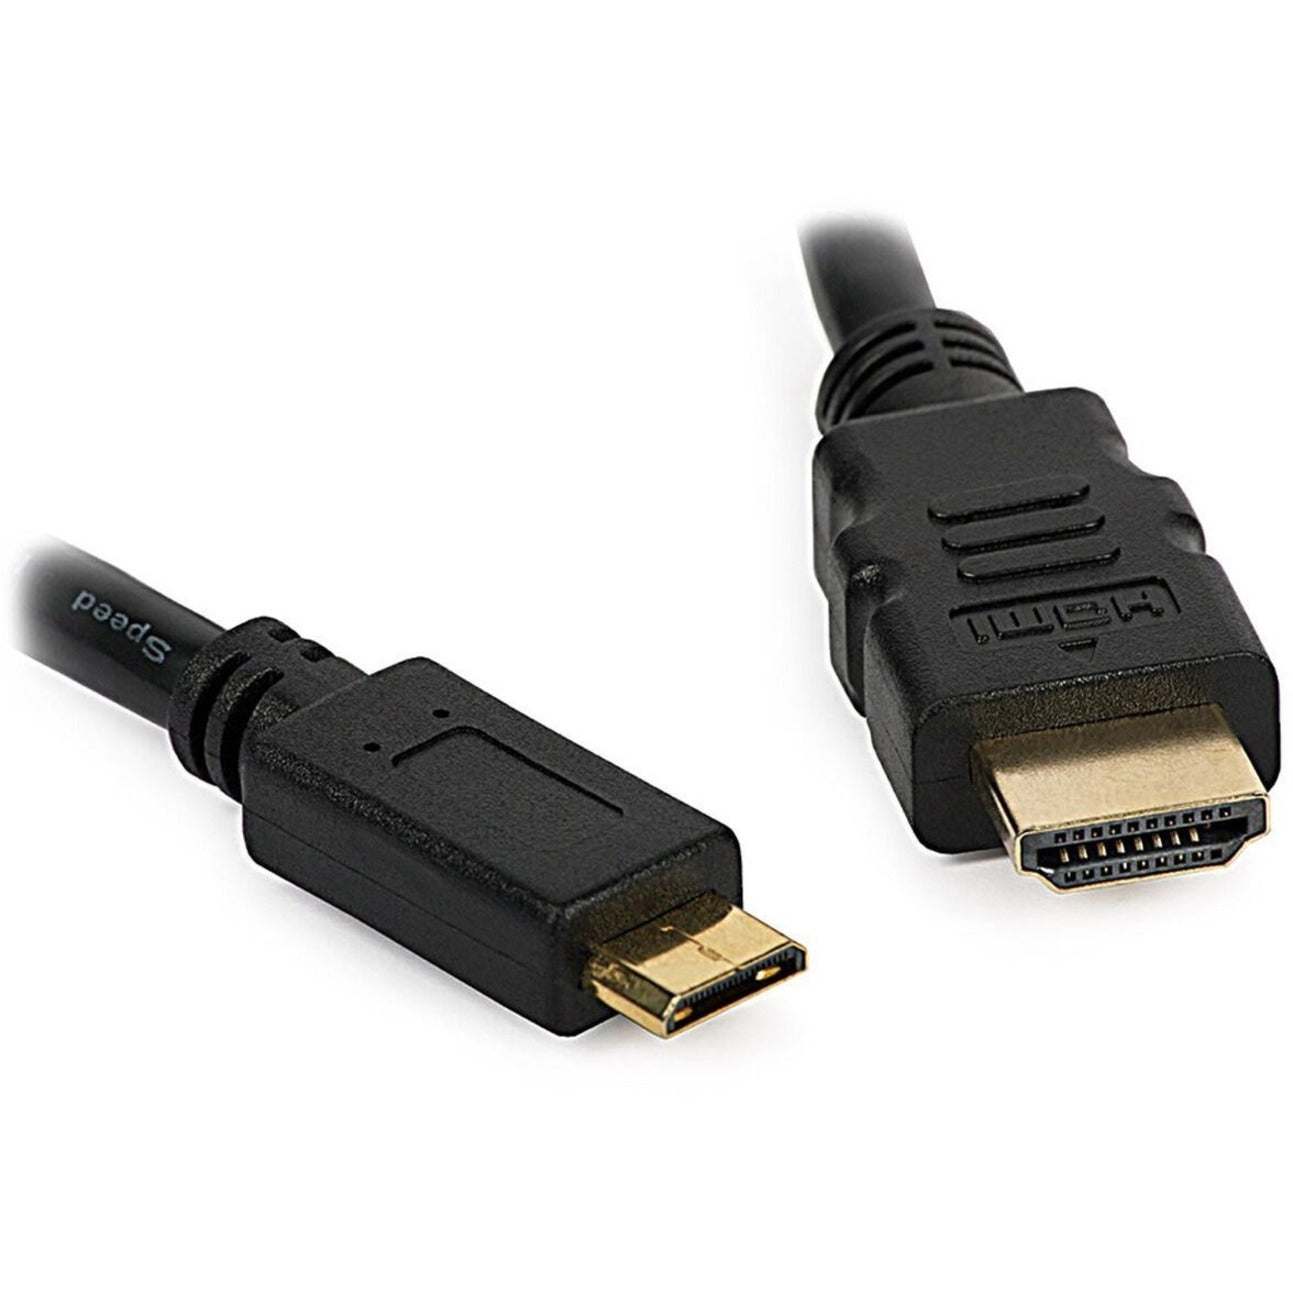 4XEM 4XHDMIMINI6FT 6FT Mini HDMI To HDMI M/M Adapter Cable, 10.2 Gbit/s Data Transfer Rate, Gold Plated Connectors